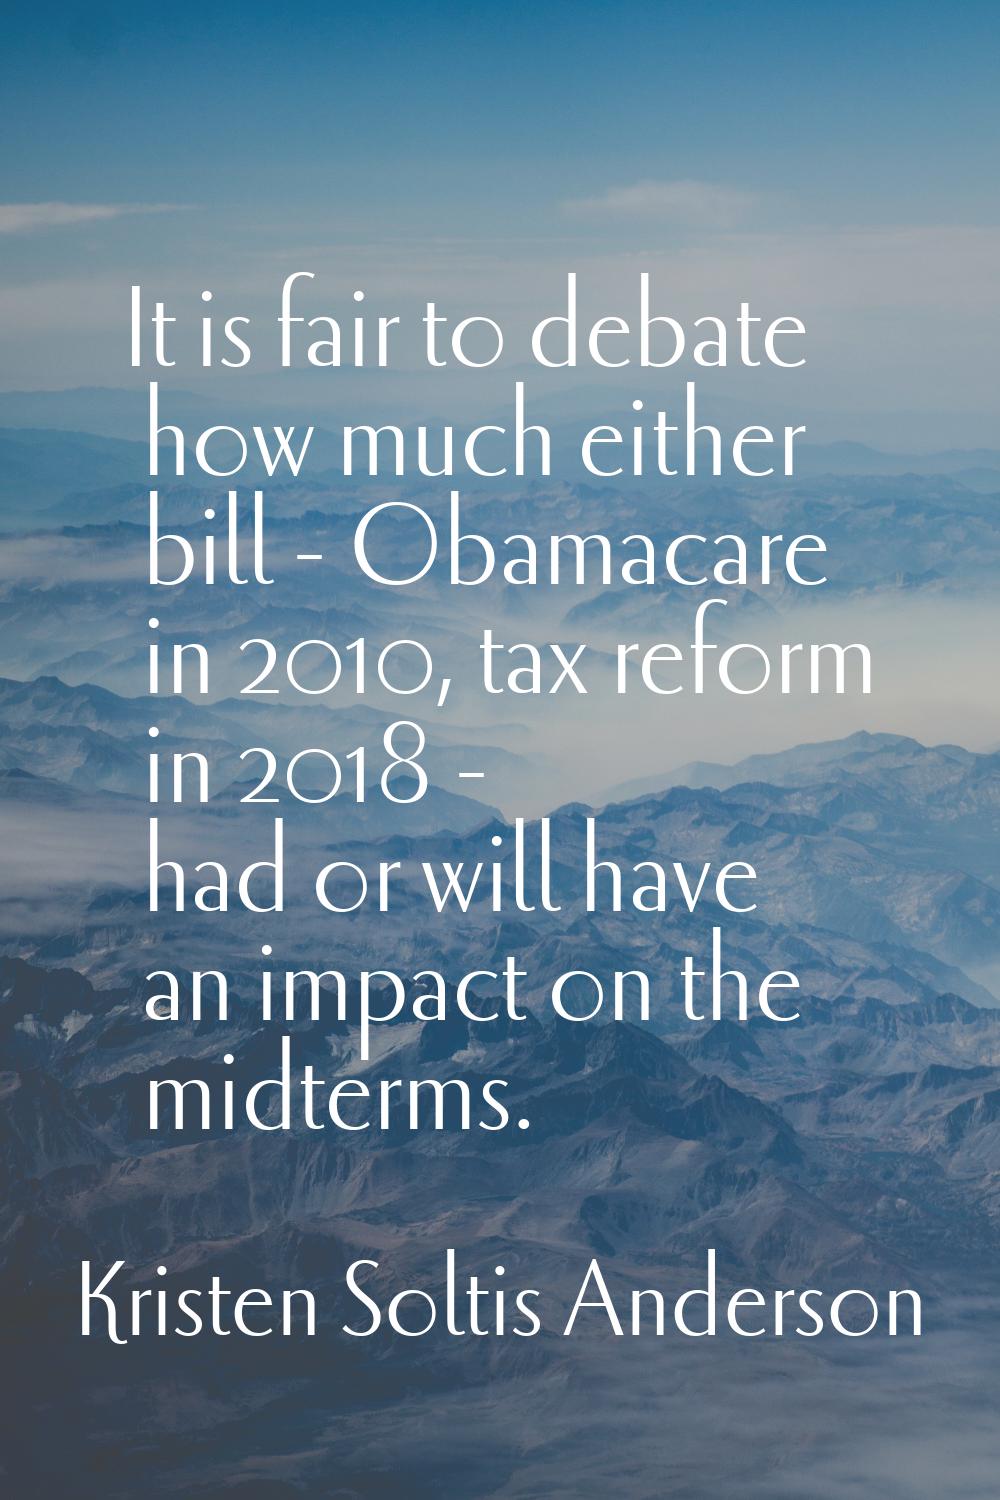 It is fair to debate how much either bill - Obamacare in 2010, tax reform in 2018 - had or will hav